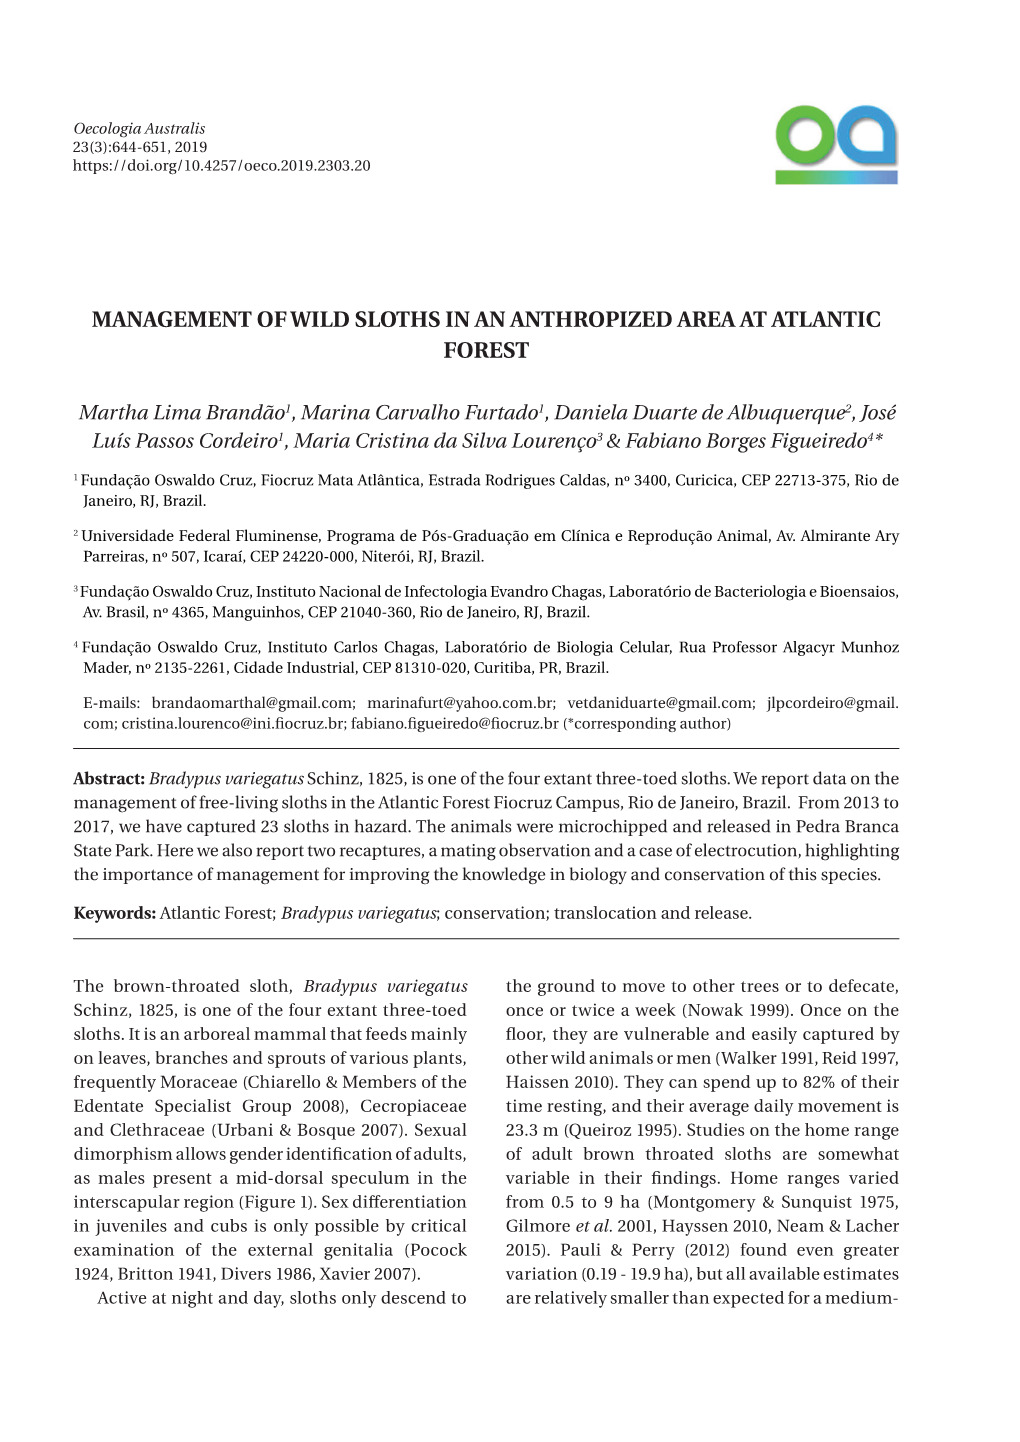 Management of Wild Sloths in an Anthropized Area at Atlantic Forest